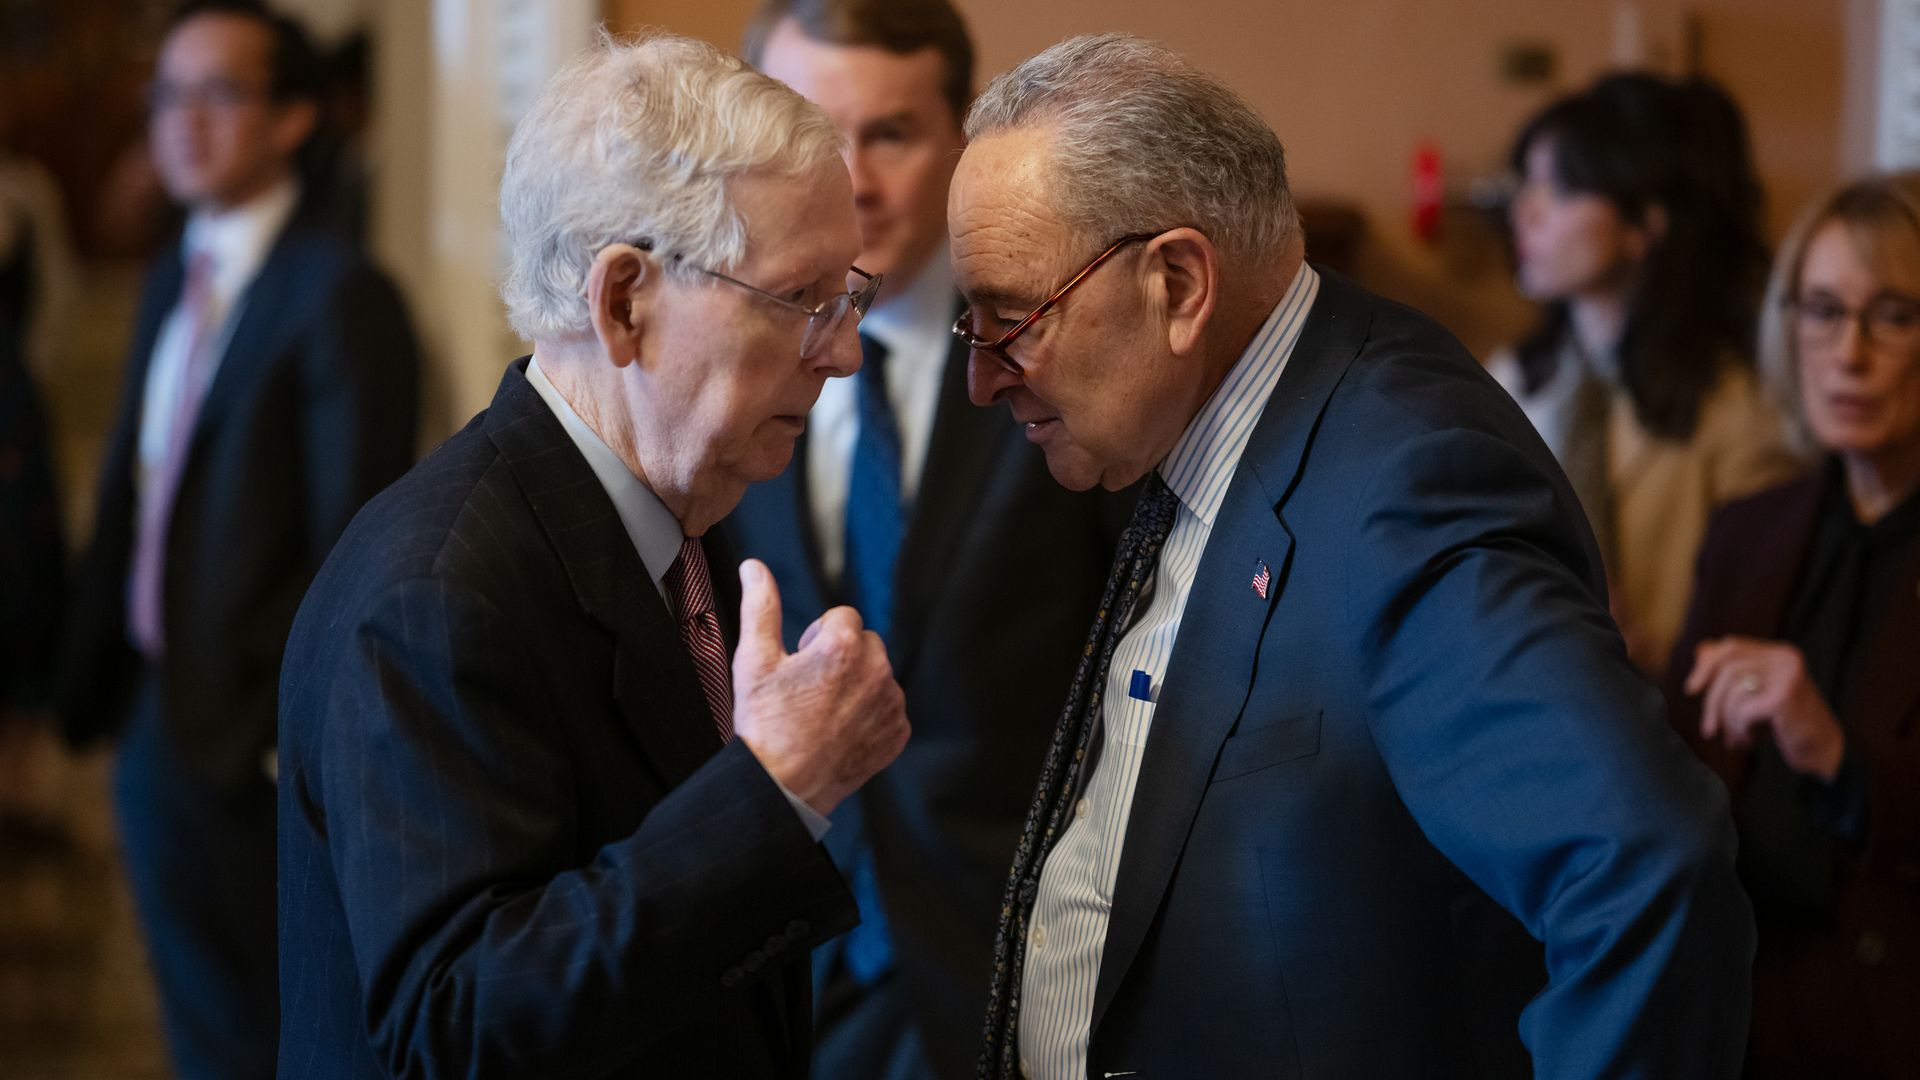 Senate Minority Leader Mitch McConnell, wearing a dark blue suit, light blue shirt, light red tie and glasses, talks to Majority Leader Chuck Schumer, wearing a blue suit, light blue shirt, blue tie and glasses.